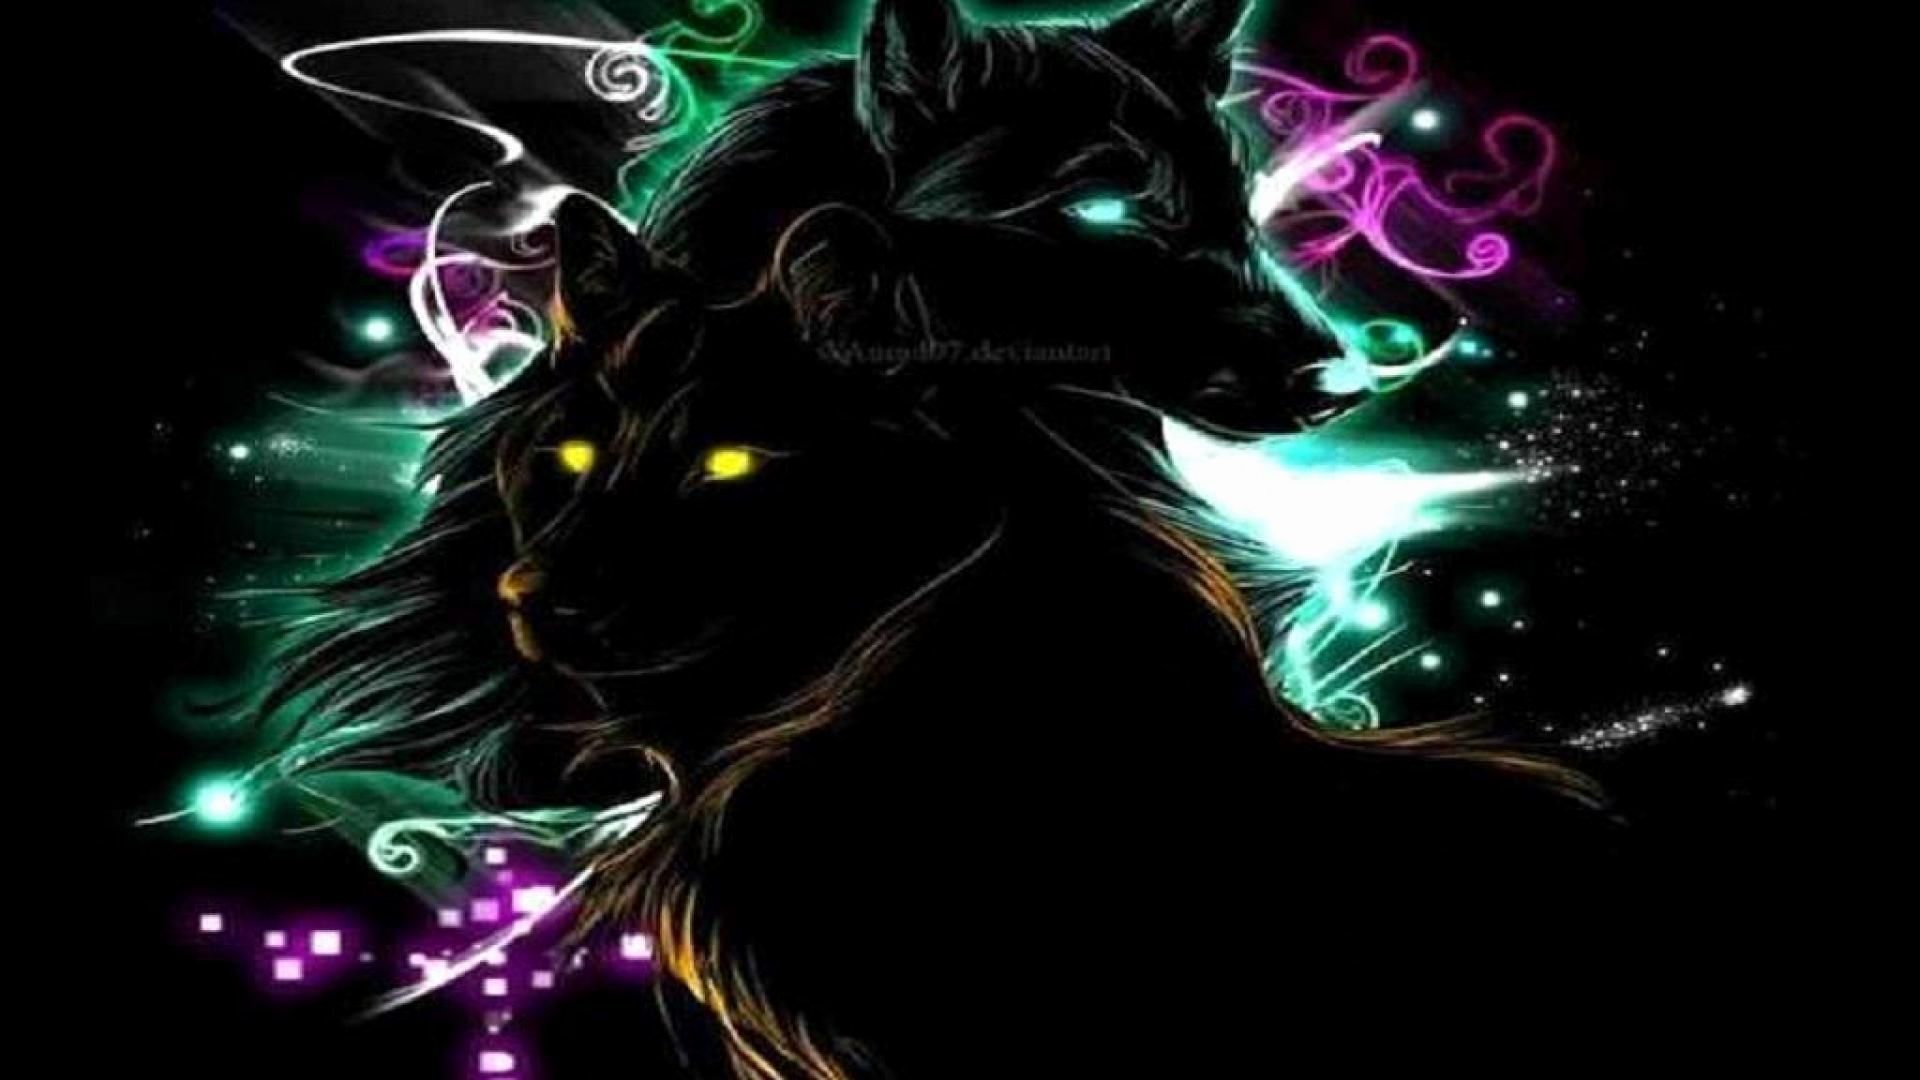 Neon Wolf Wallpaper Fresh Neon Wolf Wallpaper 54 Image for You of The Hudson